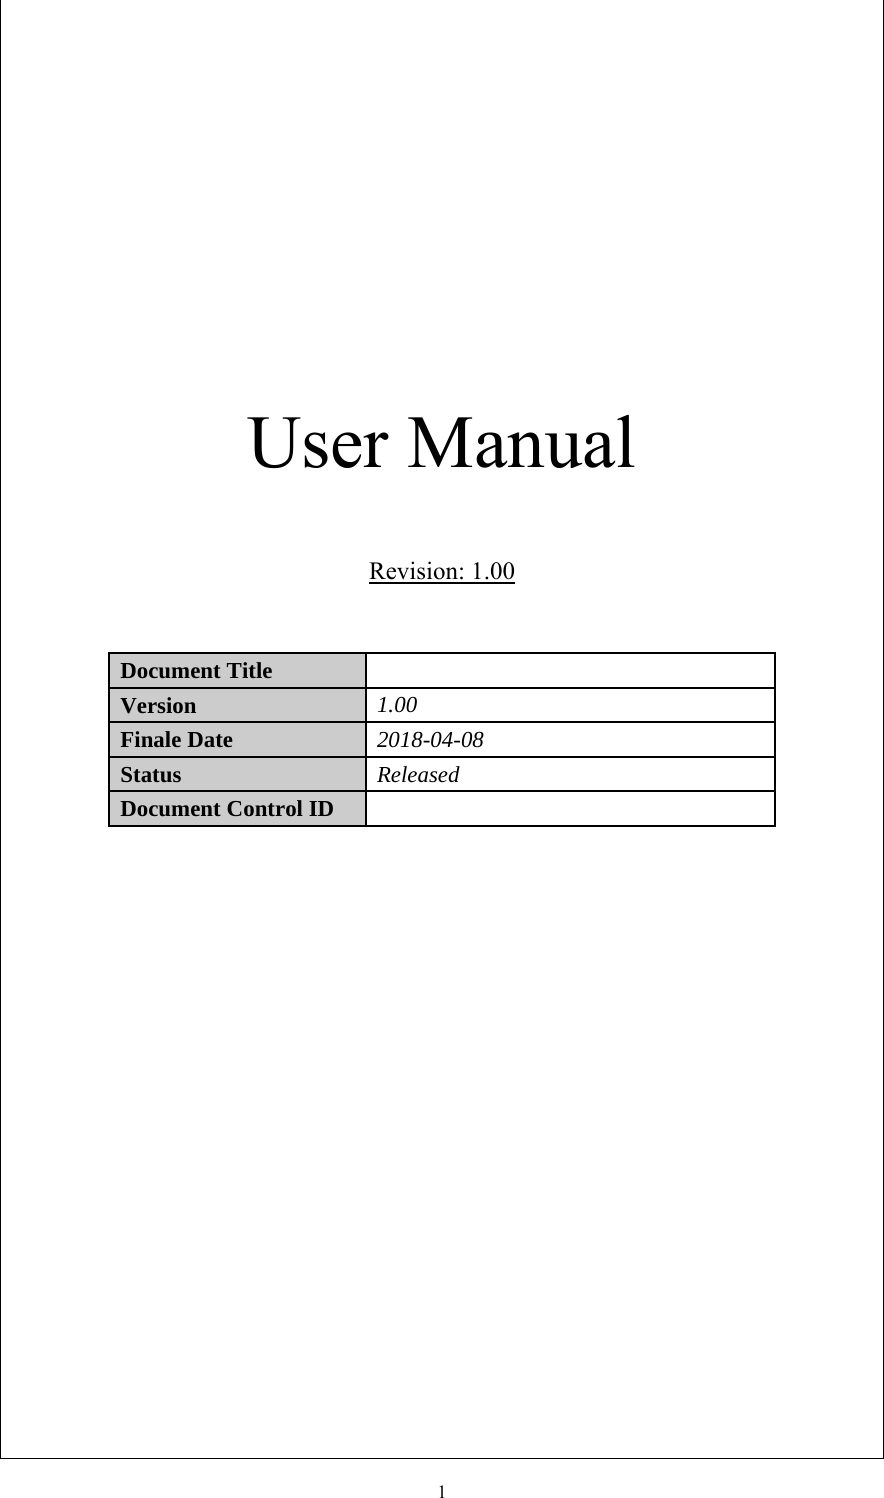 1User Manual Revision: 1.00 Document Title  Version   1.00  Finale Date   2018-04-08 Status   Released Document Control ID  